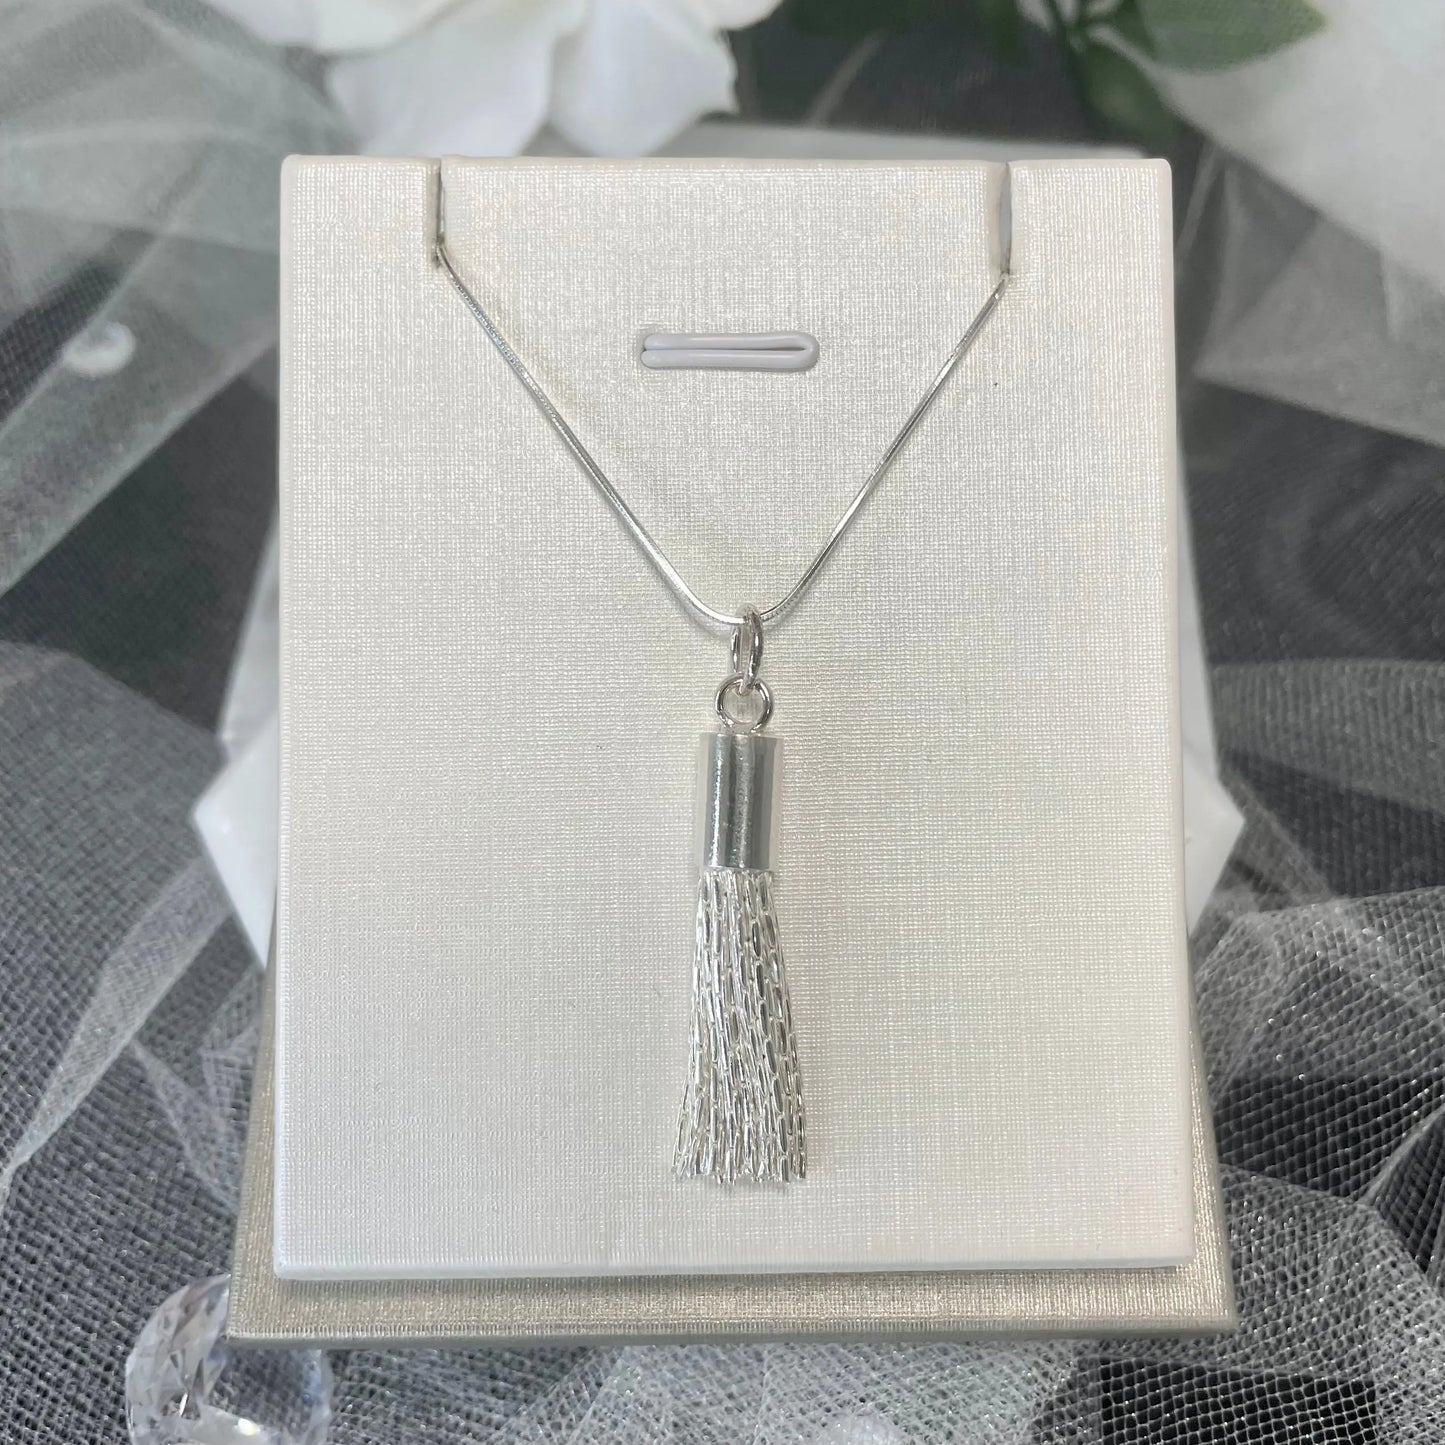 Elegant silver necklace with a tassel pendant on a minimalist display card, surrounded by soft white netting and decorative crystal elements, highlighting its sophisticated and modern design.